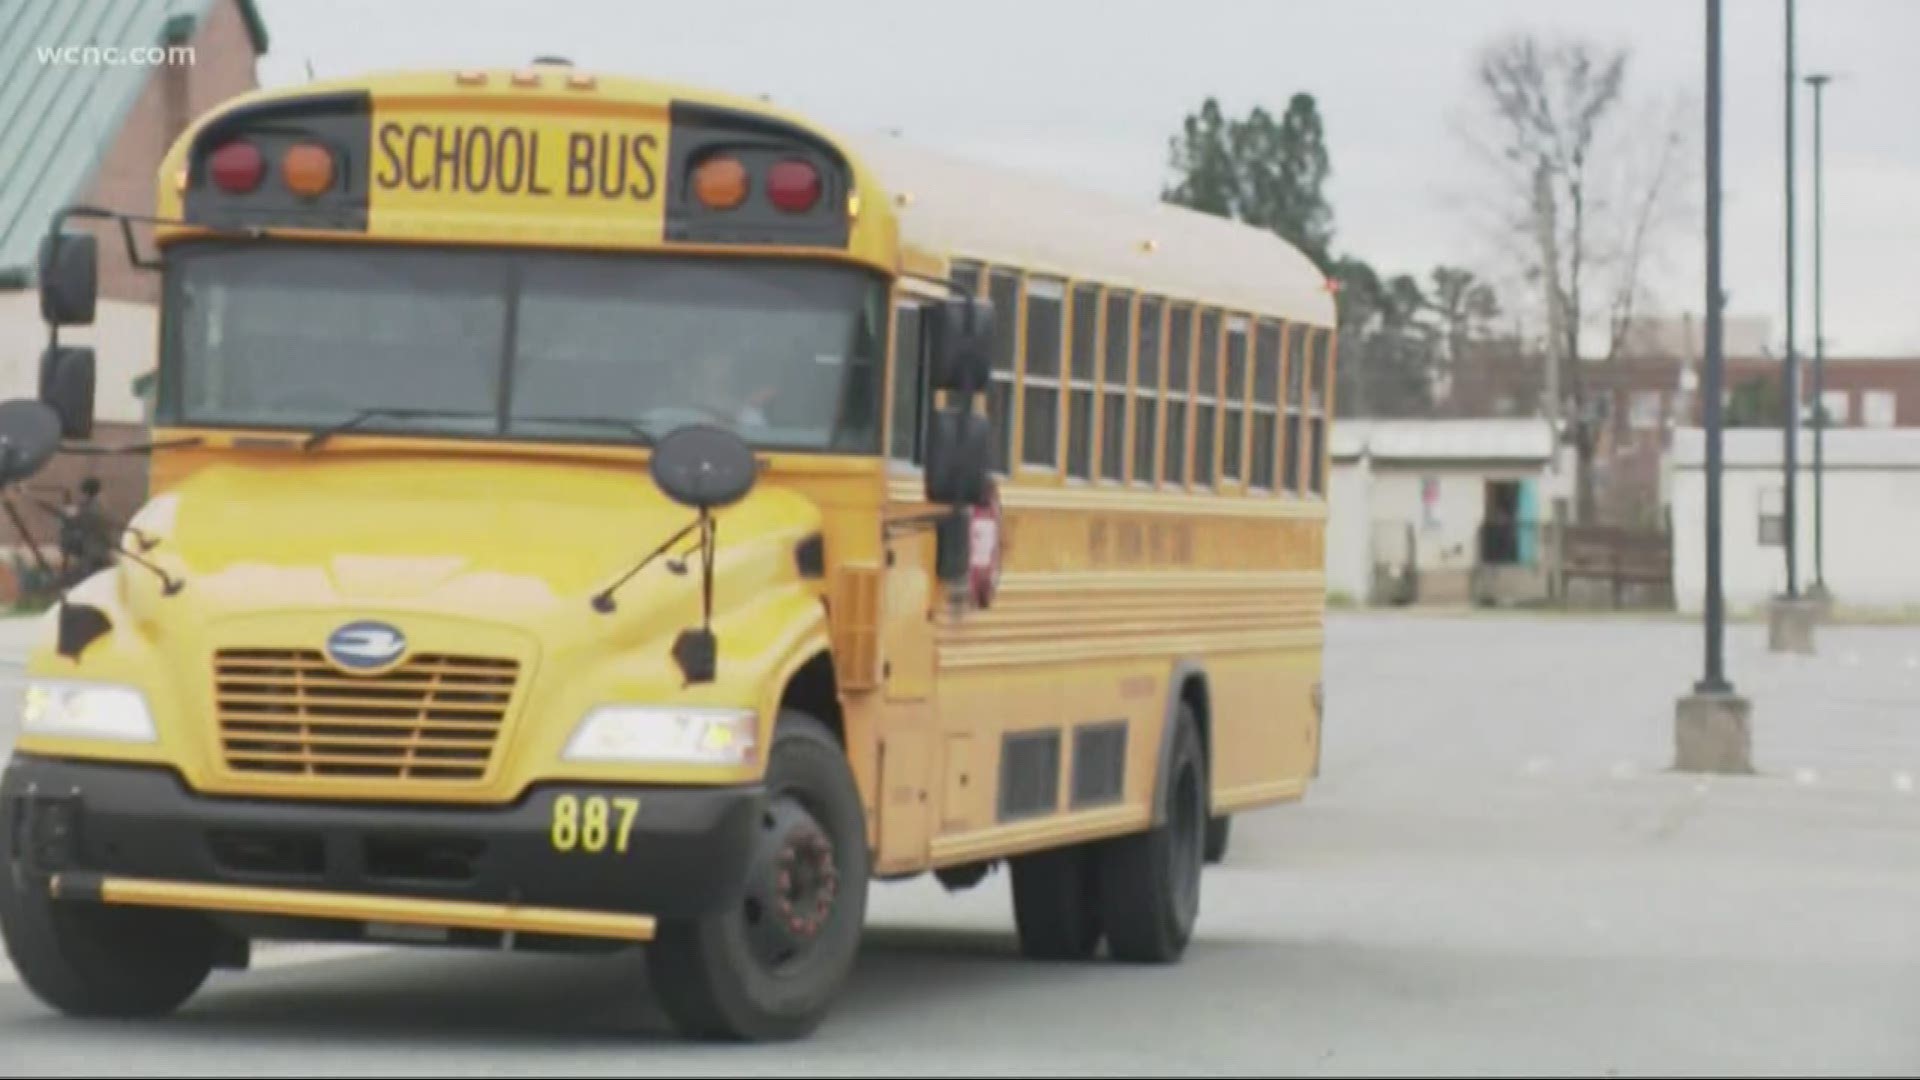 Police said the 7-year-old got onto his school bus, headed for Blythe Elementary school in Huntersville.